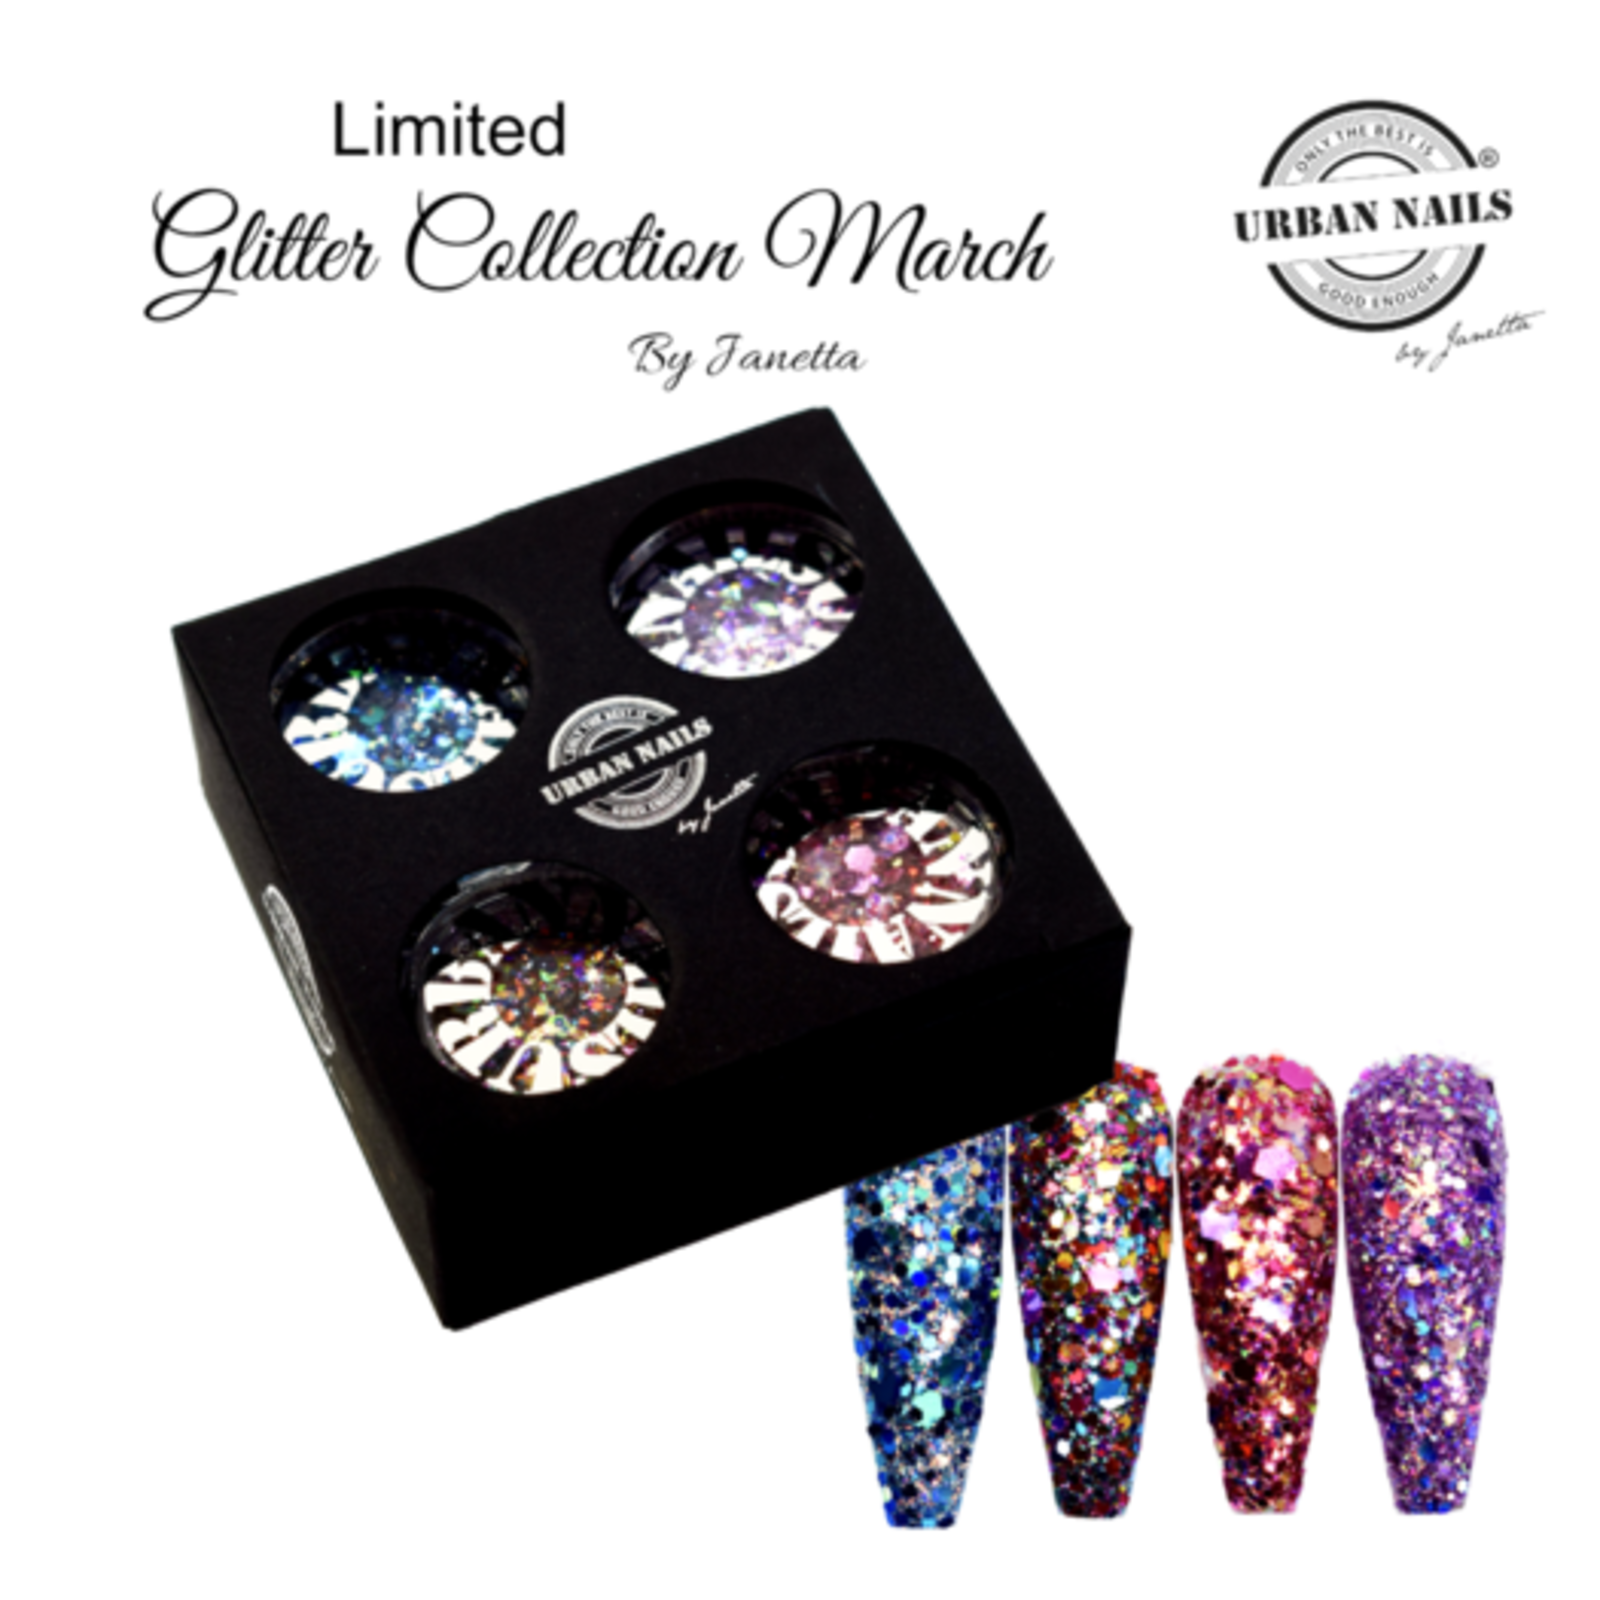 Urban nails Limited product Glitter collection March